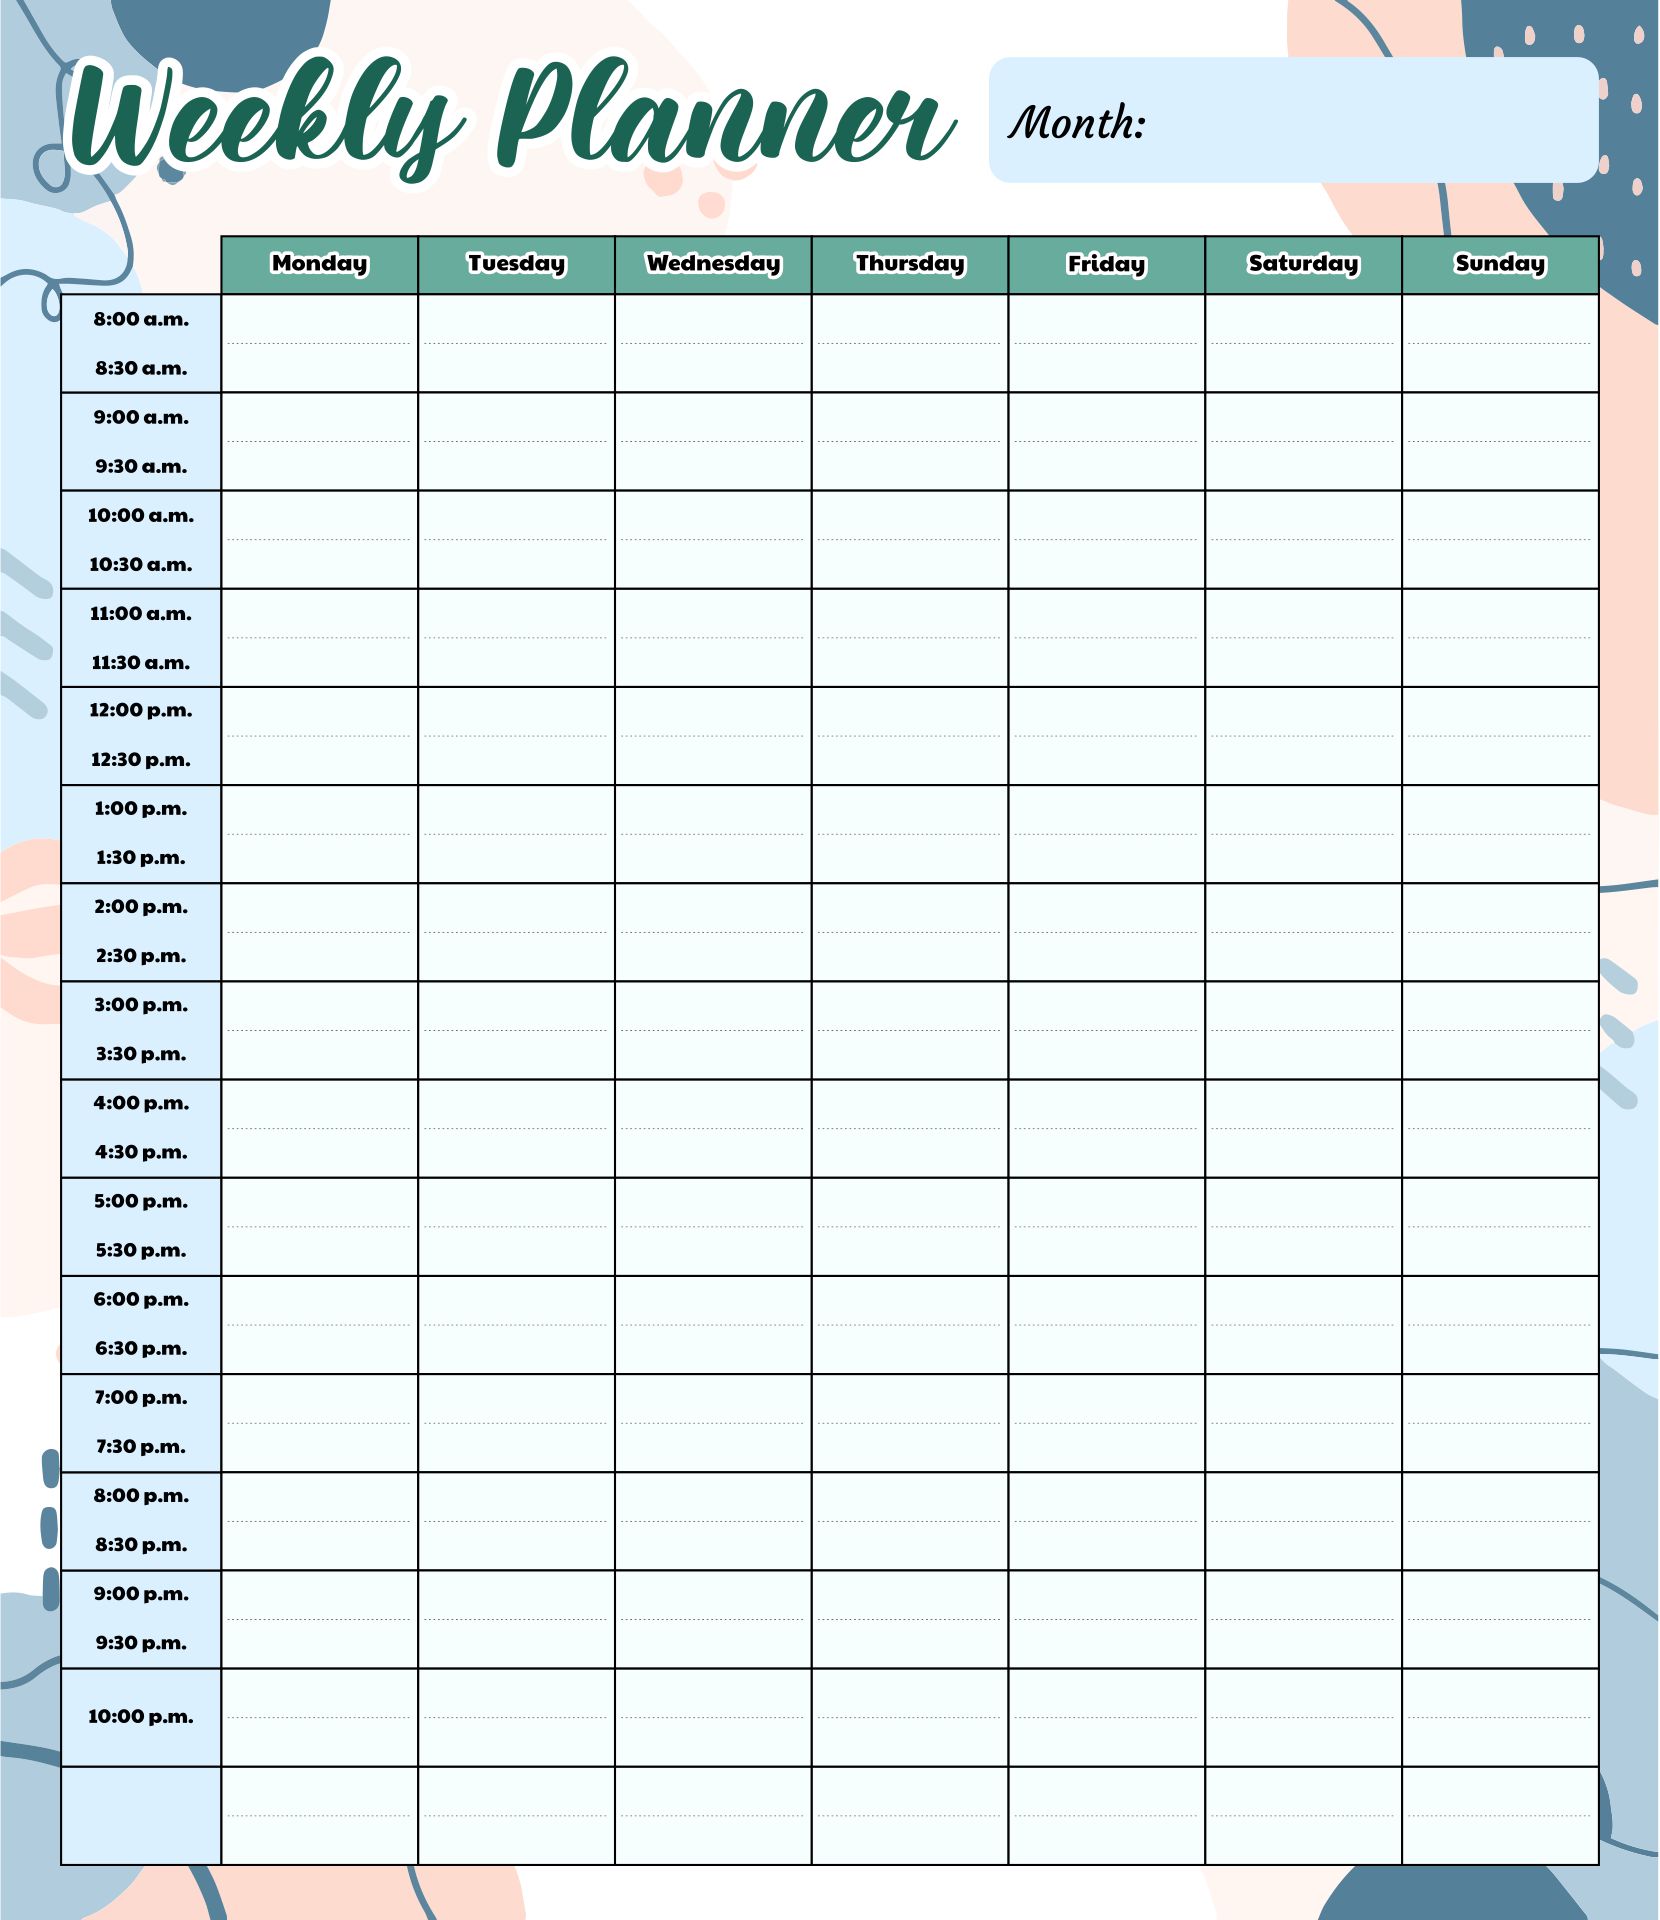 6-best-images-of-no-template-with-times-weekly-planner-printable-calendar-printable-blank